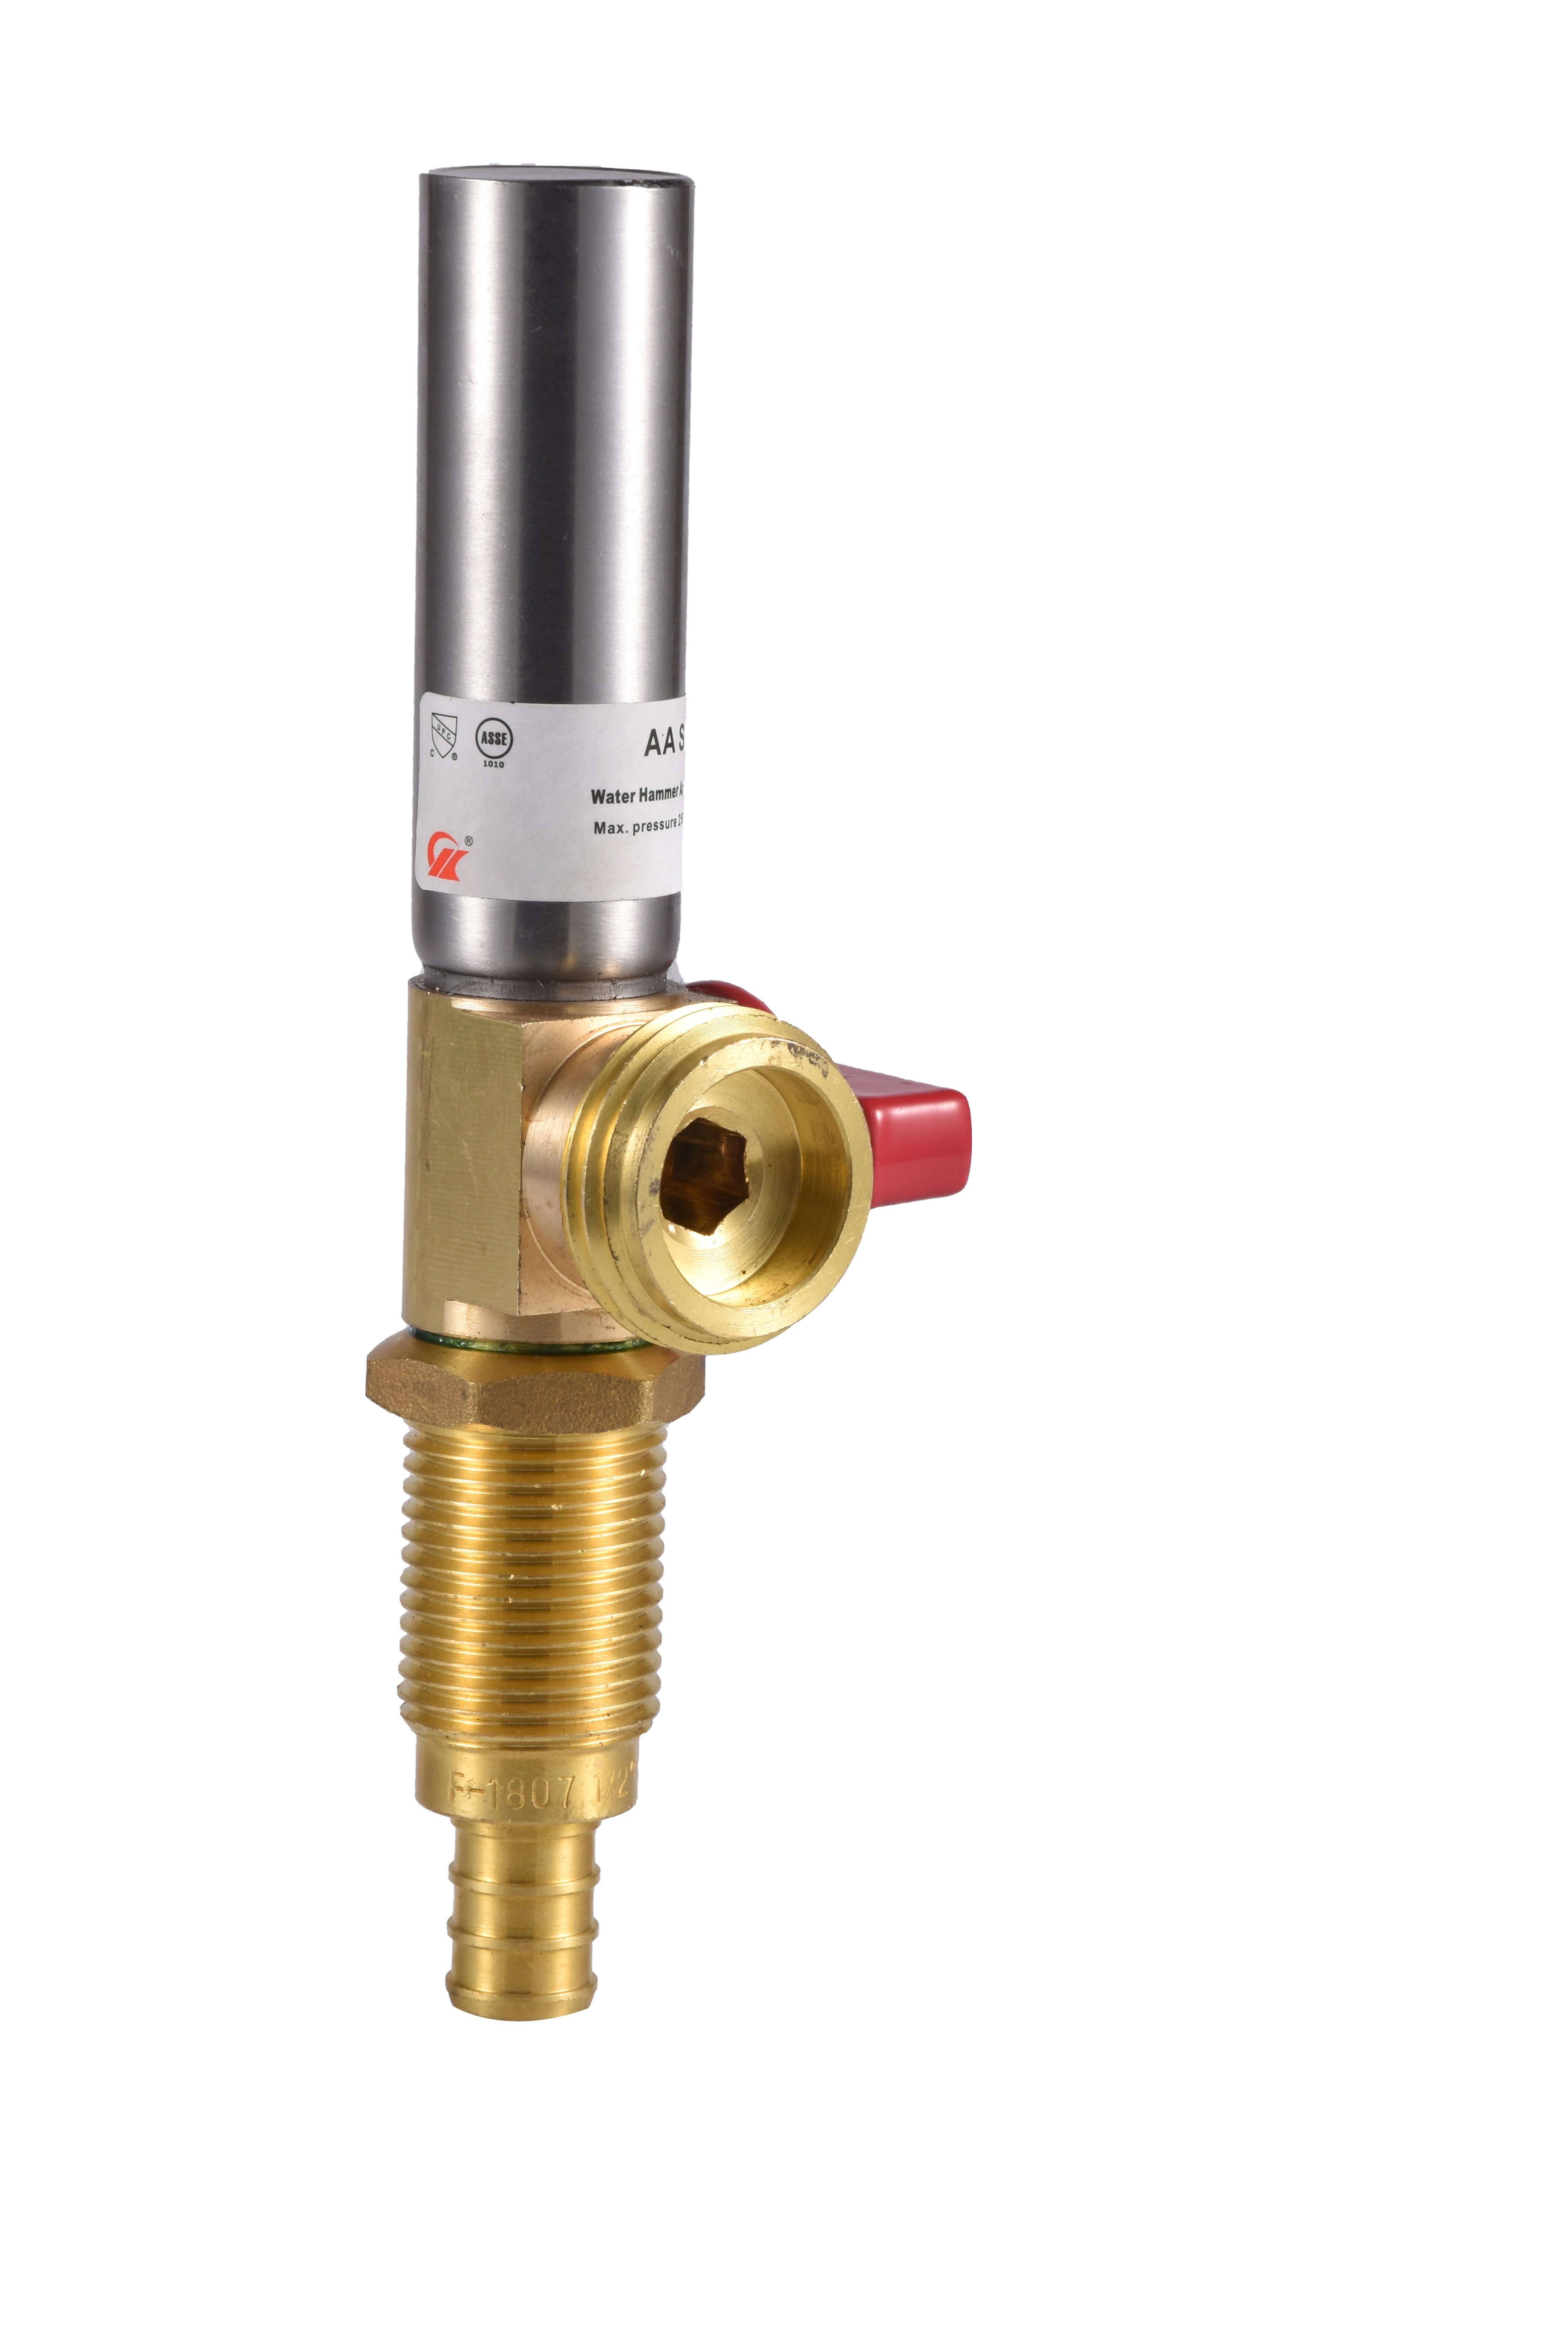 Valve with Stainless Steel Water Hammer Arrester 1/2" F-1807 Crimp Pex x 3/4" MHT Left Blue and Right Red Handle